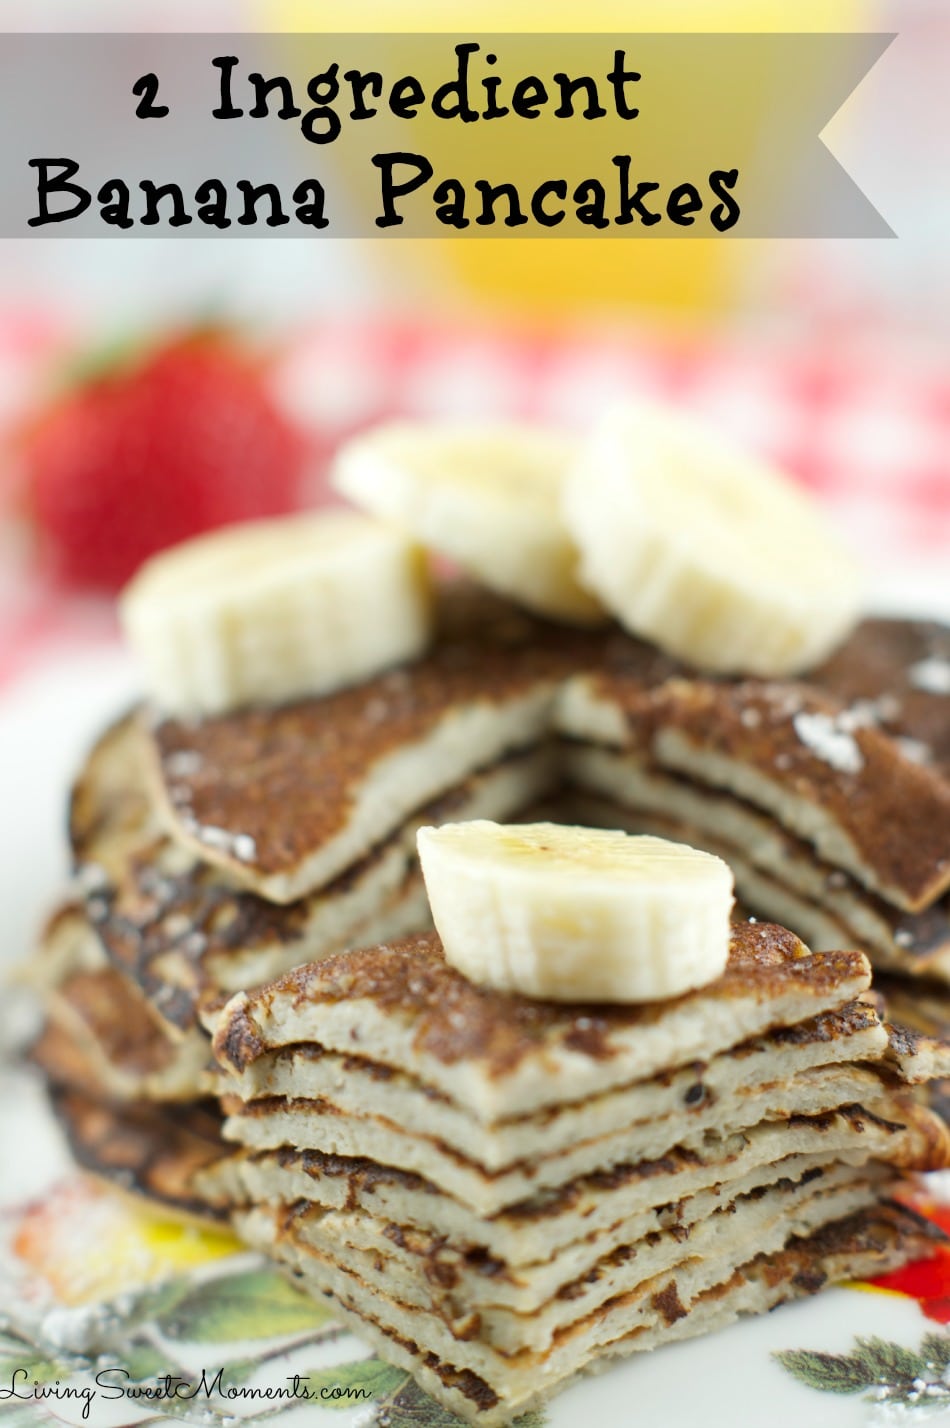 2 Ingredient Banana Pancakes - so easy to make! All you need is 2 eggs and a banana in a blender! That's it. They are gluten free and so delicious.